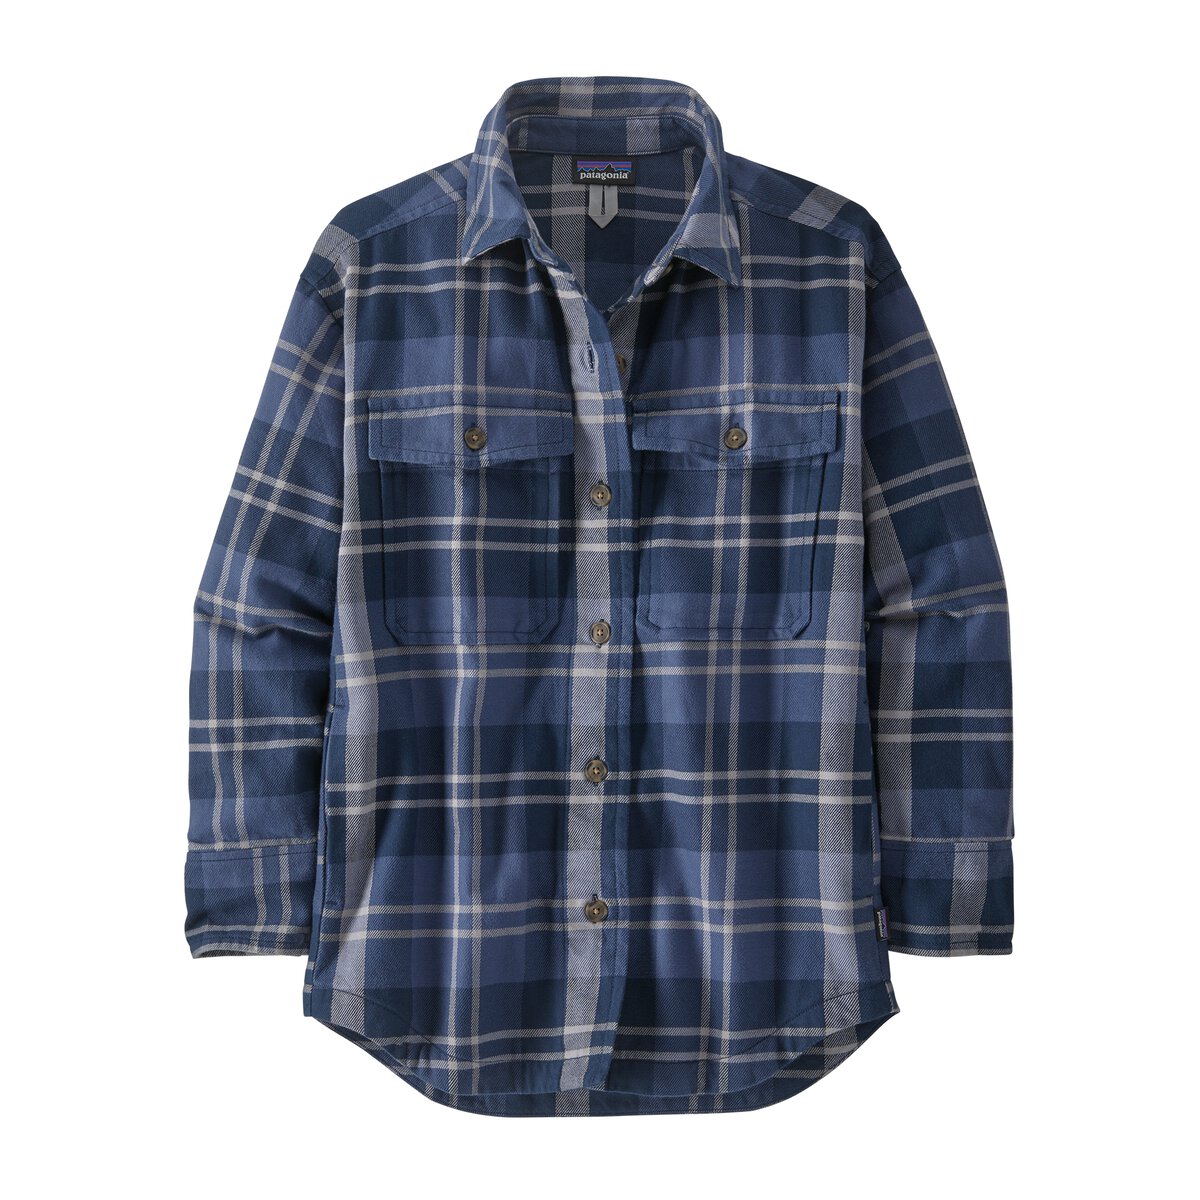 Patagonia, Heavyweight Fjord Flannel Overshirt, Women's, Bristlecone: New Navy